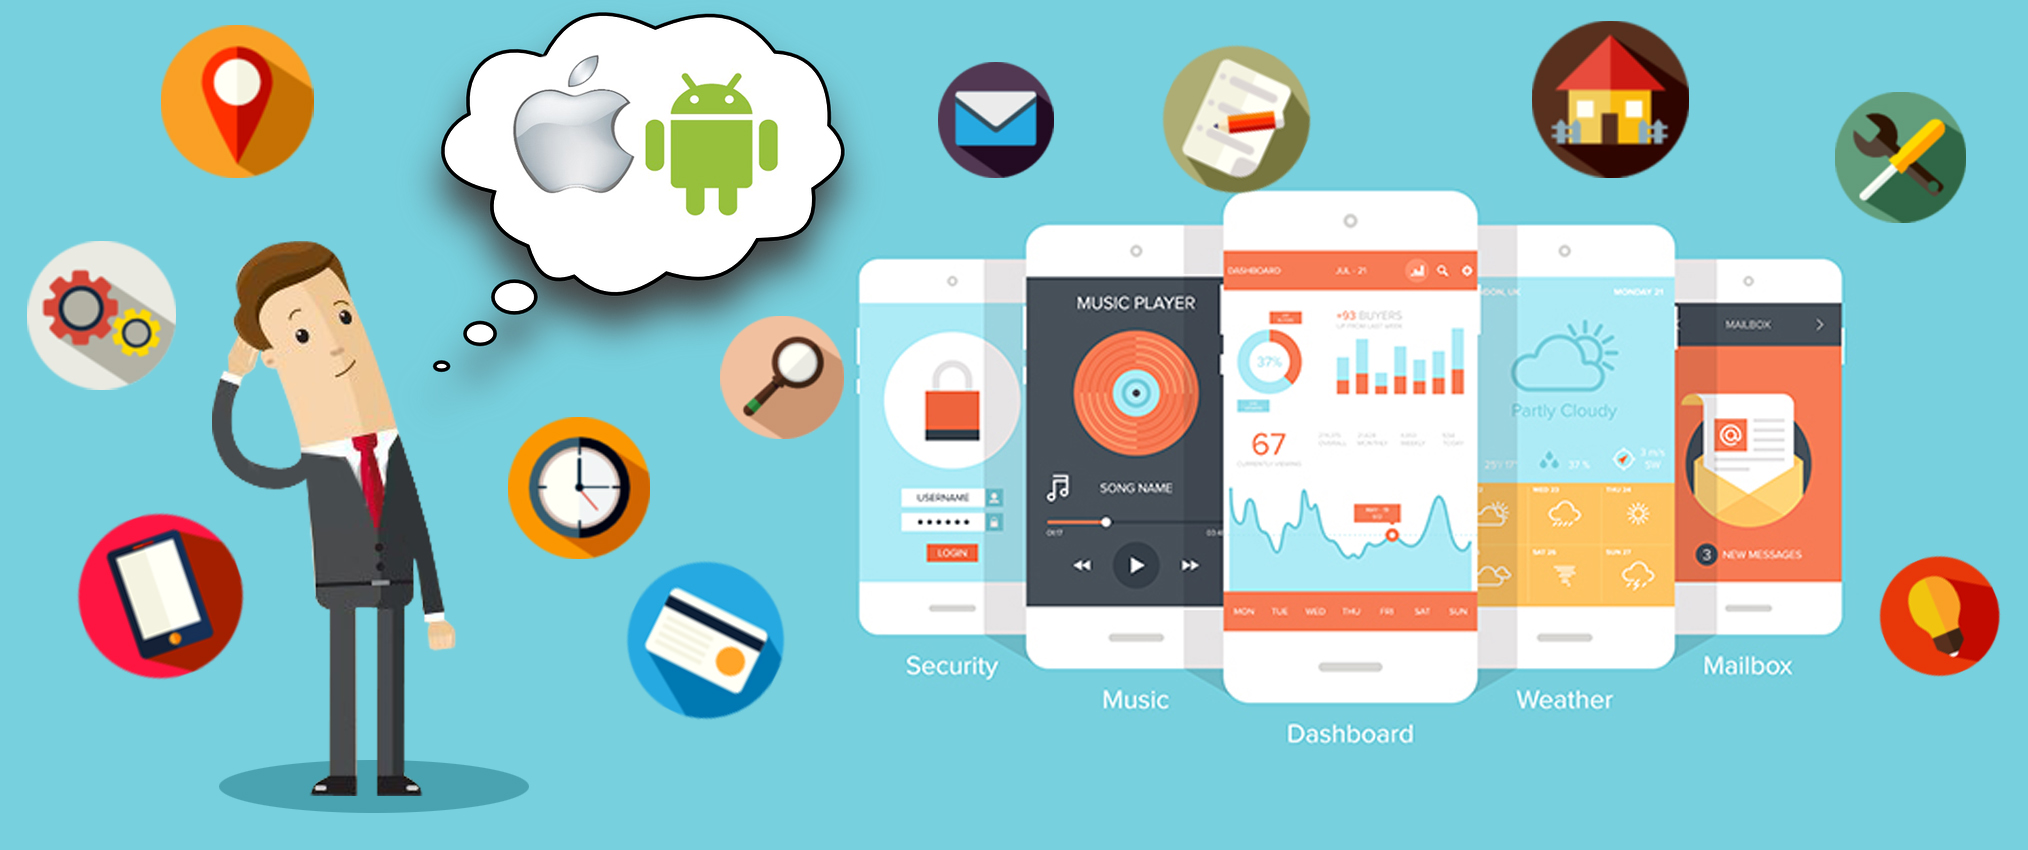 iOS or Android Which Platform is Suitable for Business App Development